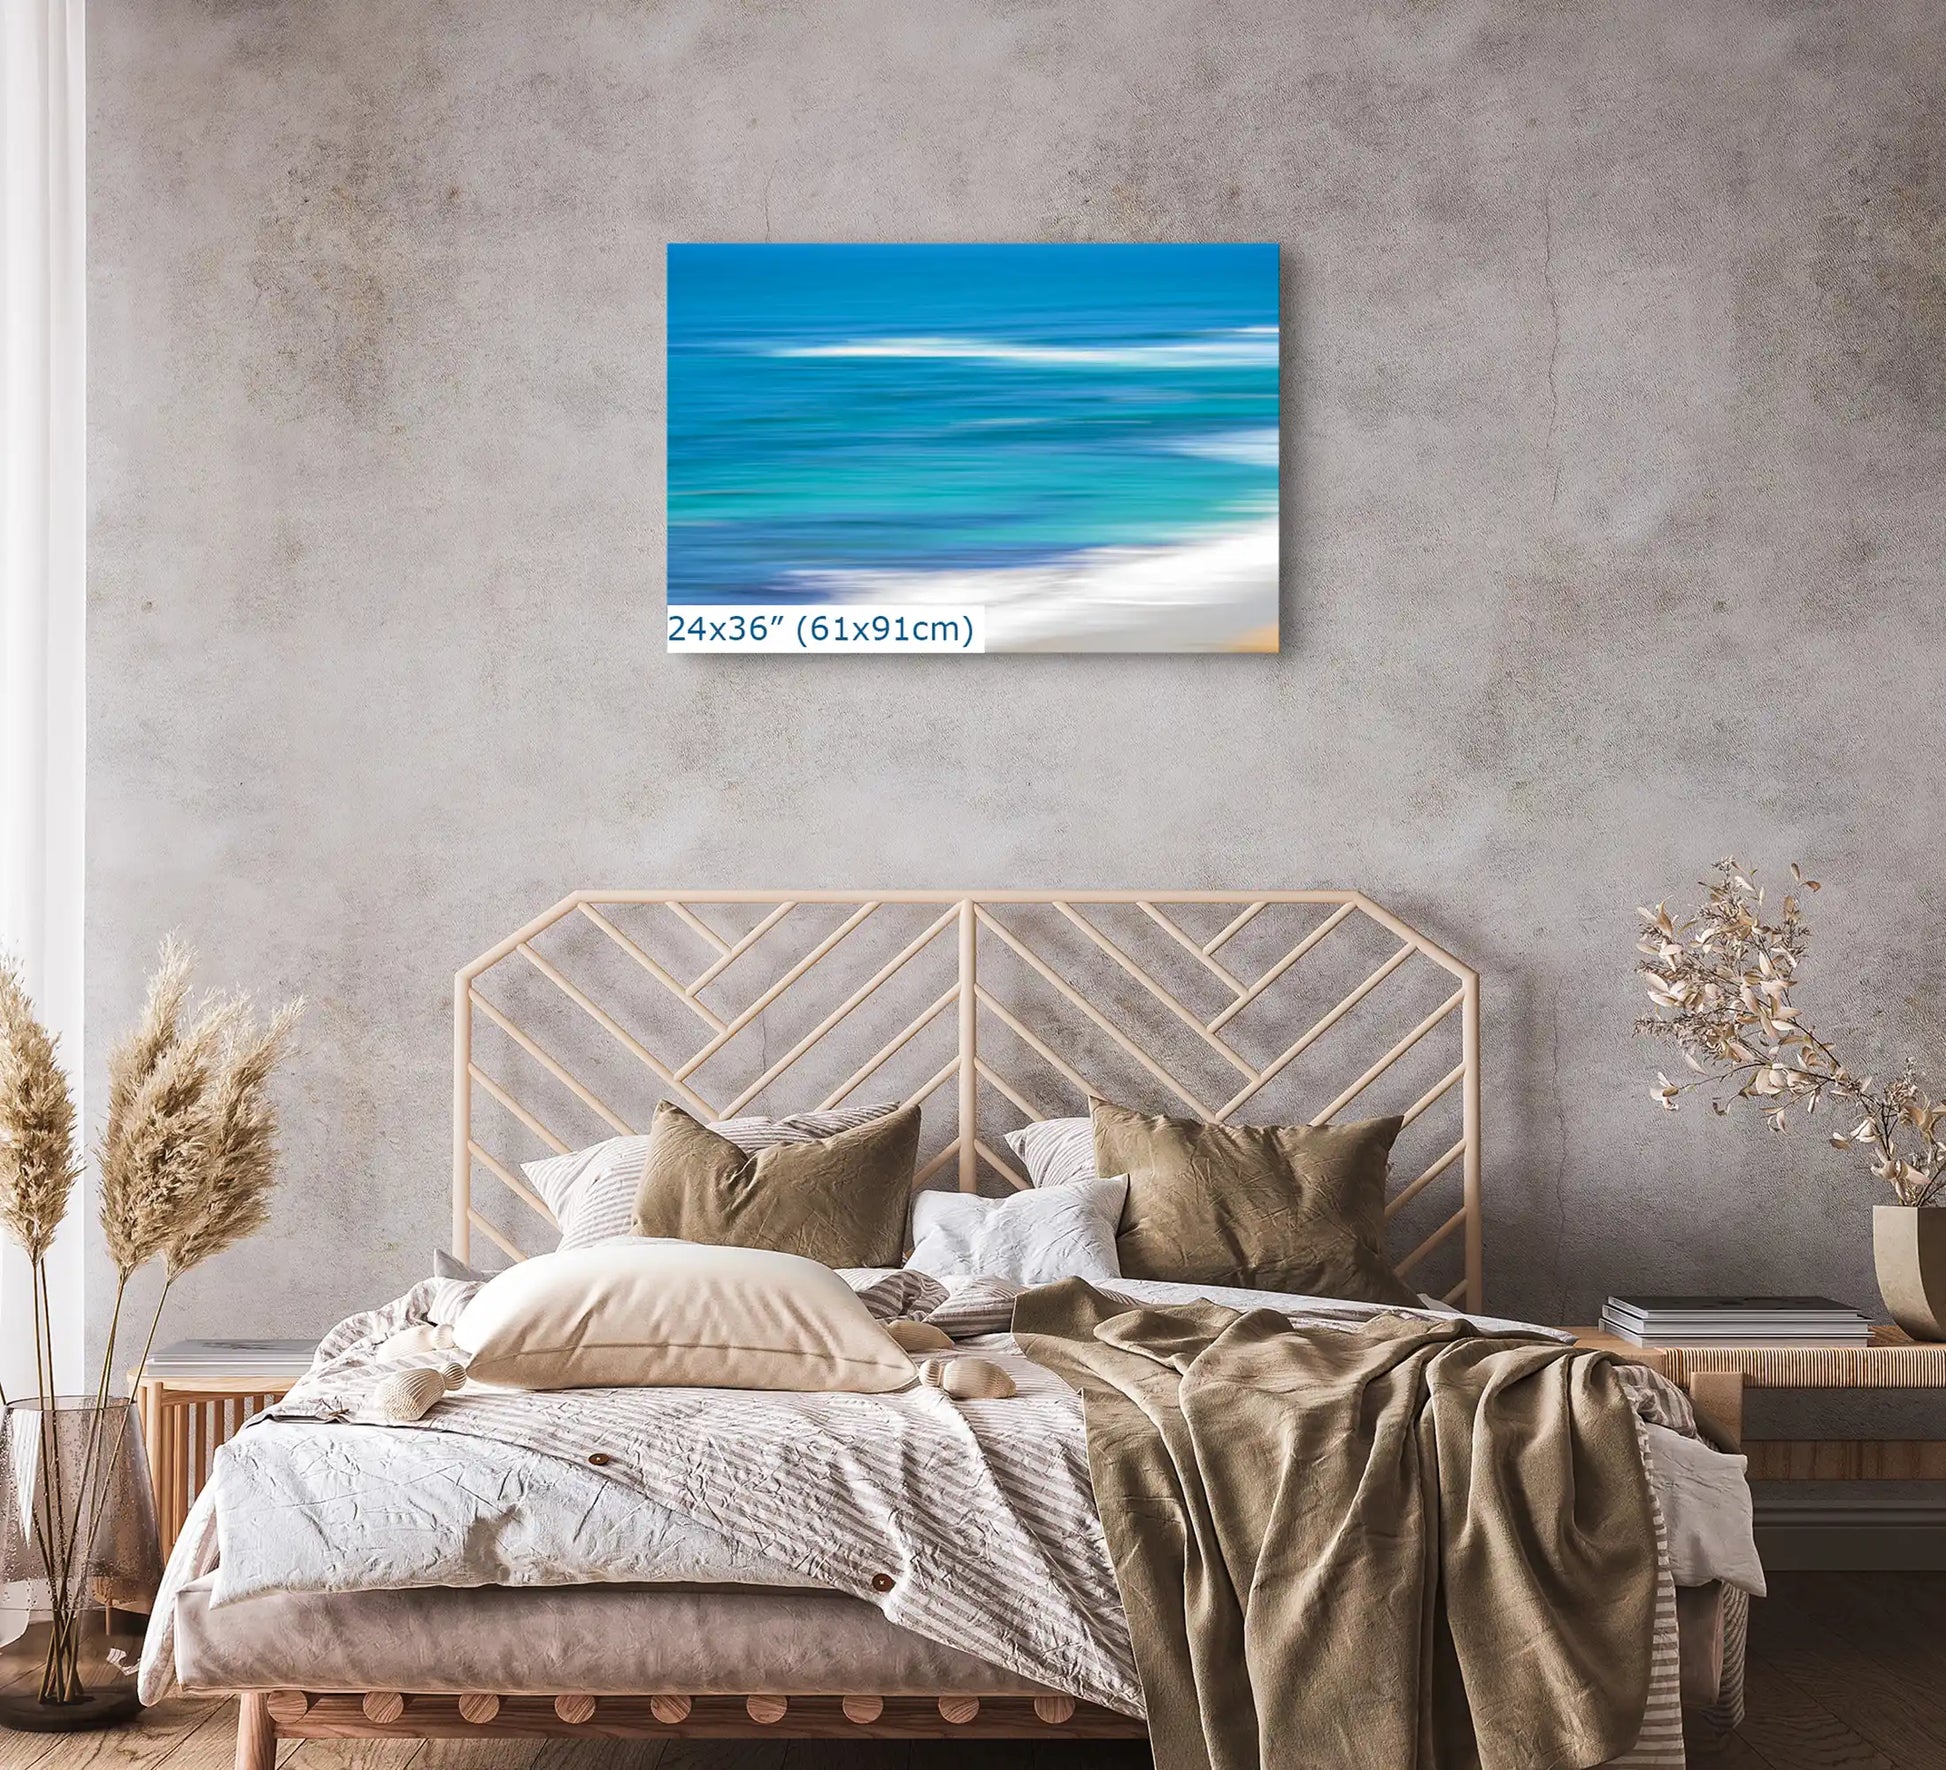 Blue Ocean abstract art in 24x36-inches over bed